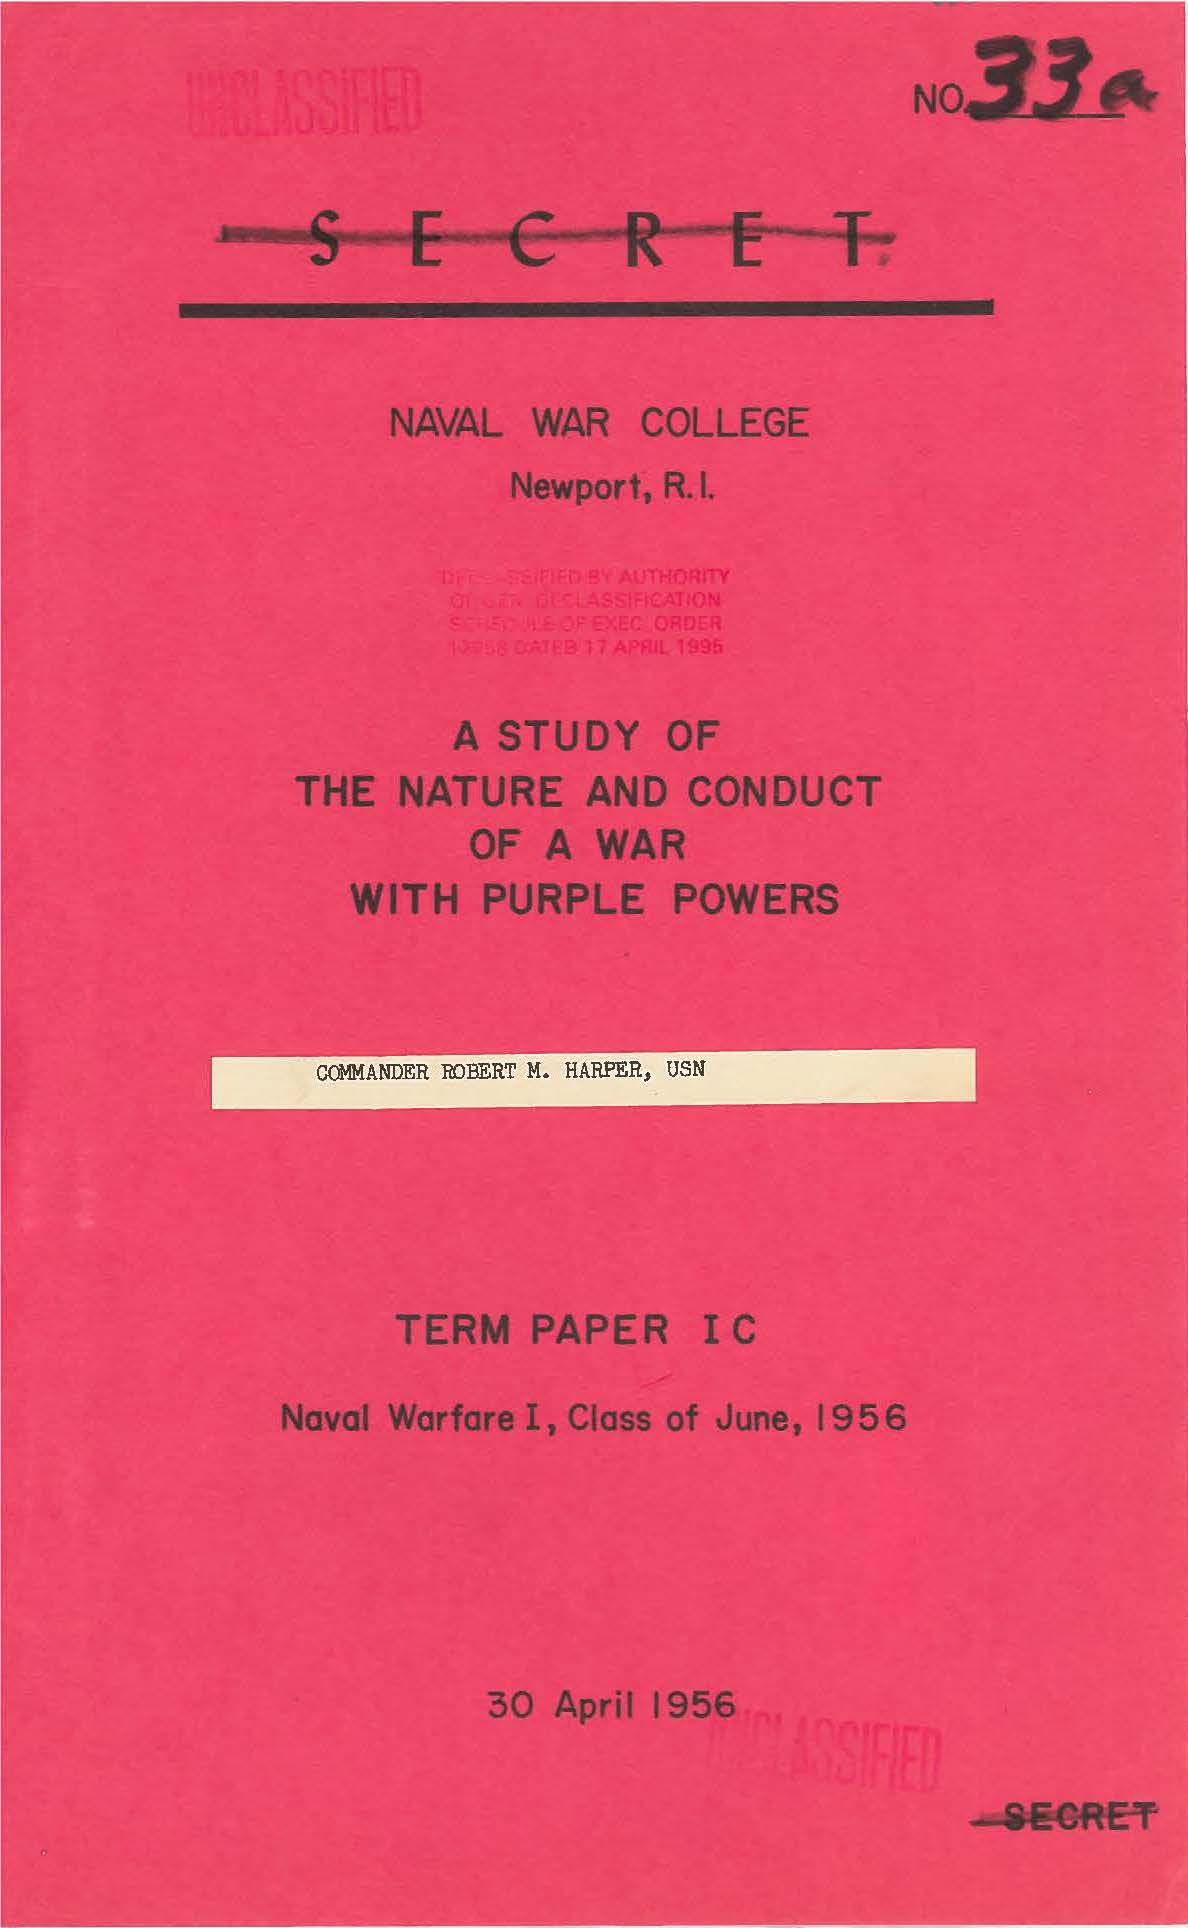 Study of the Nature and Conduct of a War with Purple Powers, Robert M. Harper